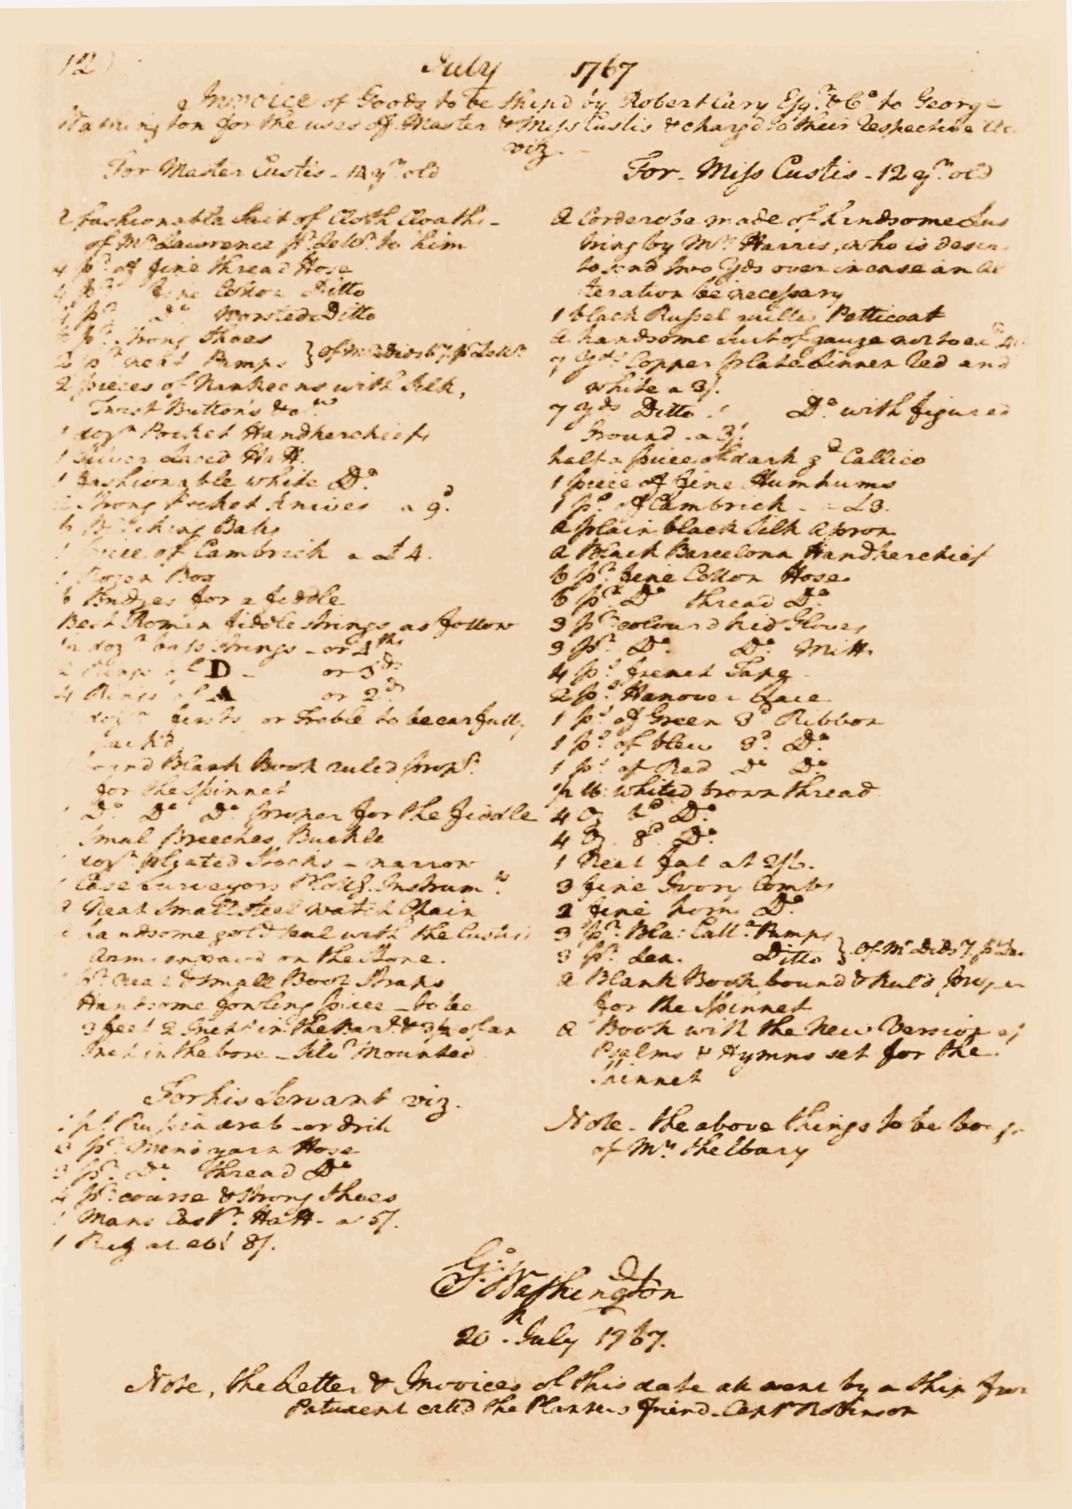 Handwritten invoice dated July 1767 detailing items ordered by President George Washington for his stepchildren from Robert Cary & Company.